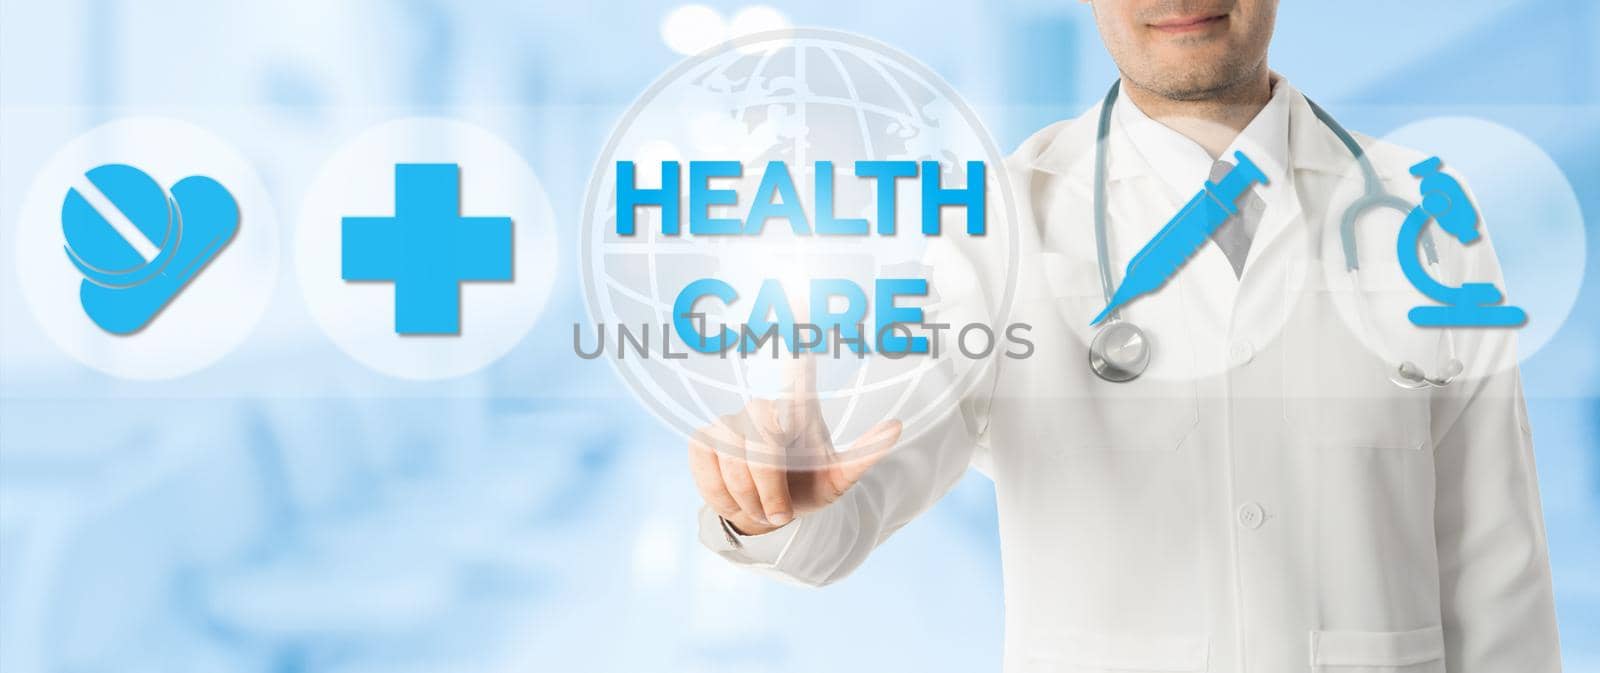 Medical Healthcare Concept - Doctor points at health icons showing symbol of medicine, medical cross and hospital lab research against blue abstract background.